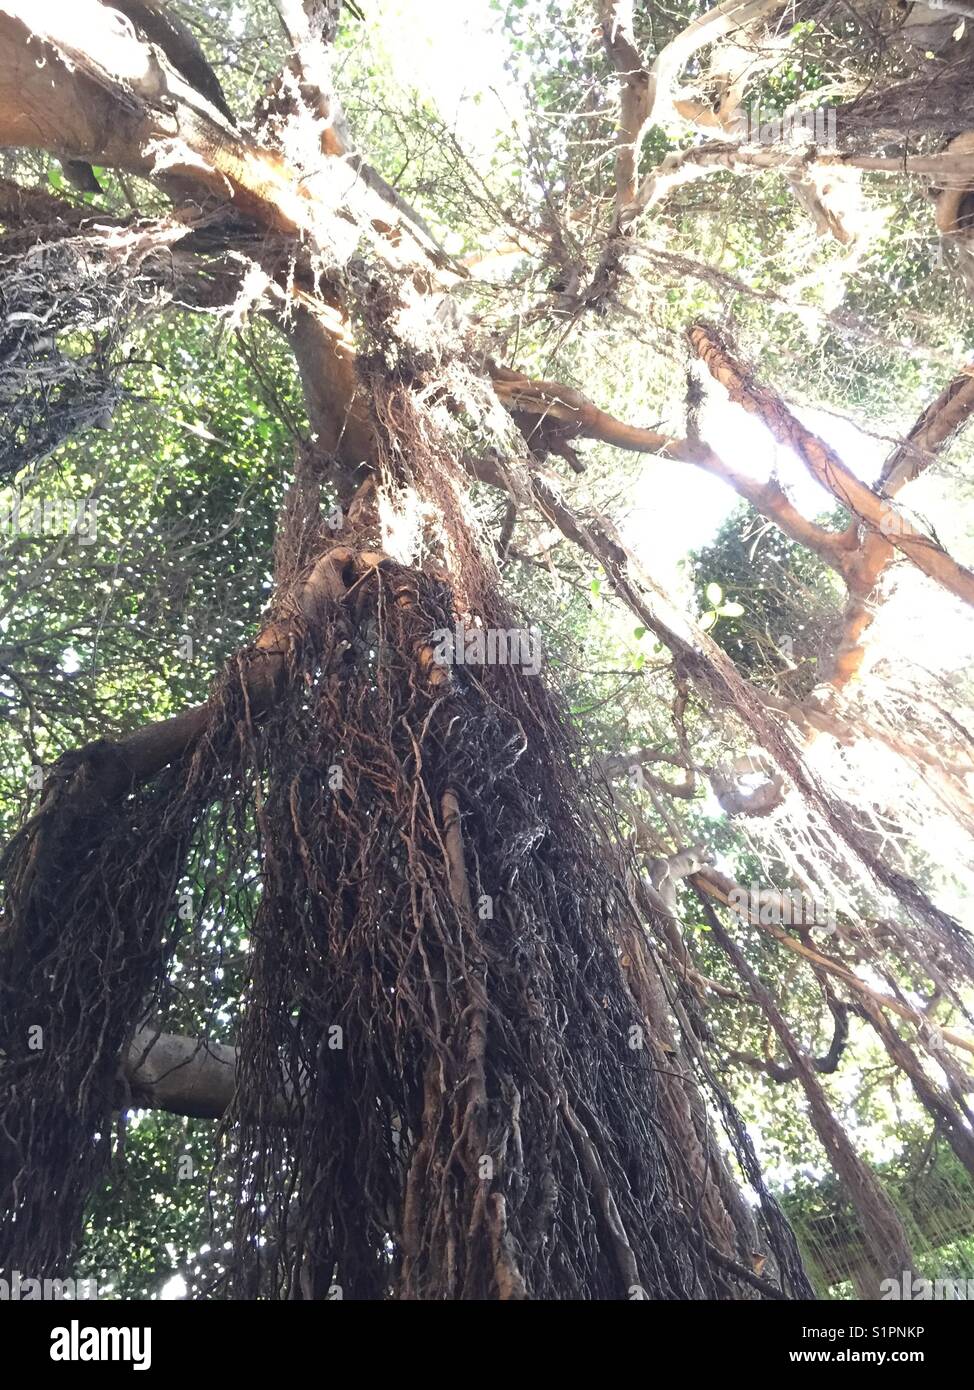 Funky tree with dead and alive parts showing. Overexposure from light at  tree top creates a contrast at the bottom Stock Photo - Alamy